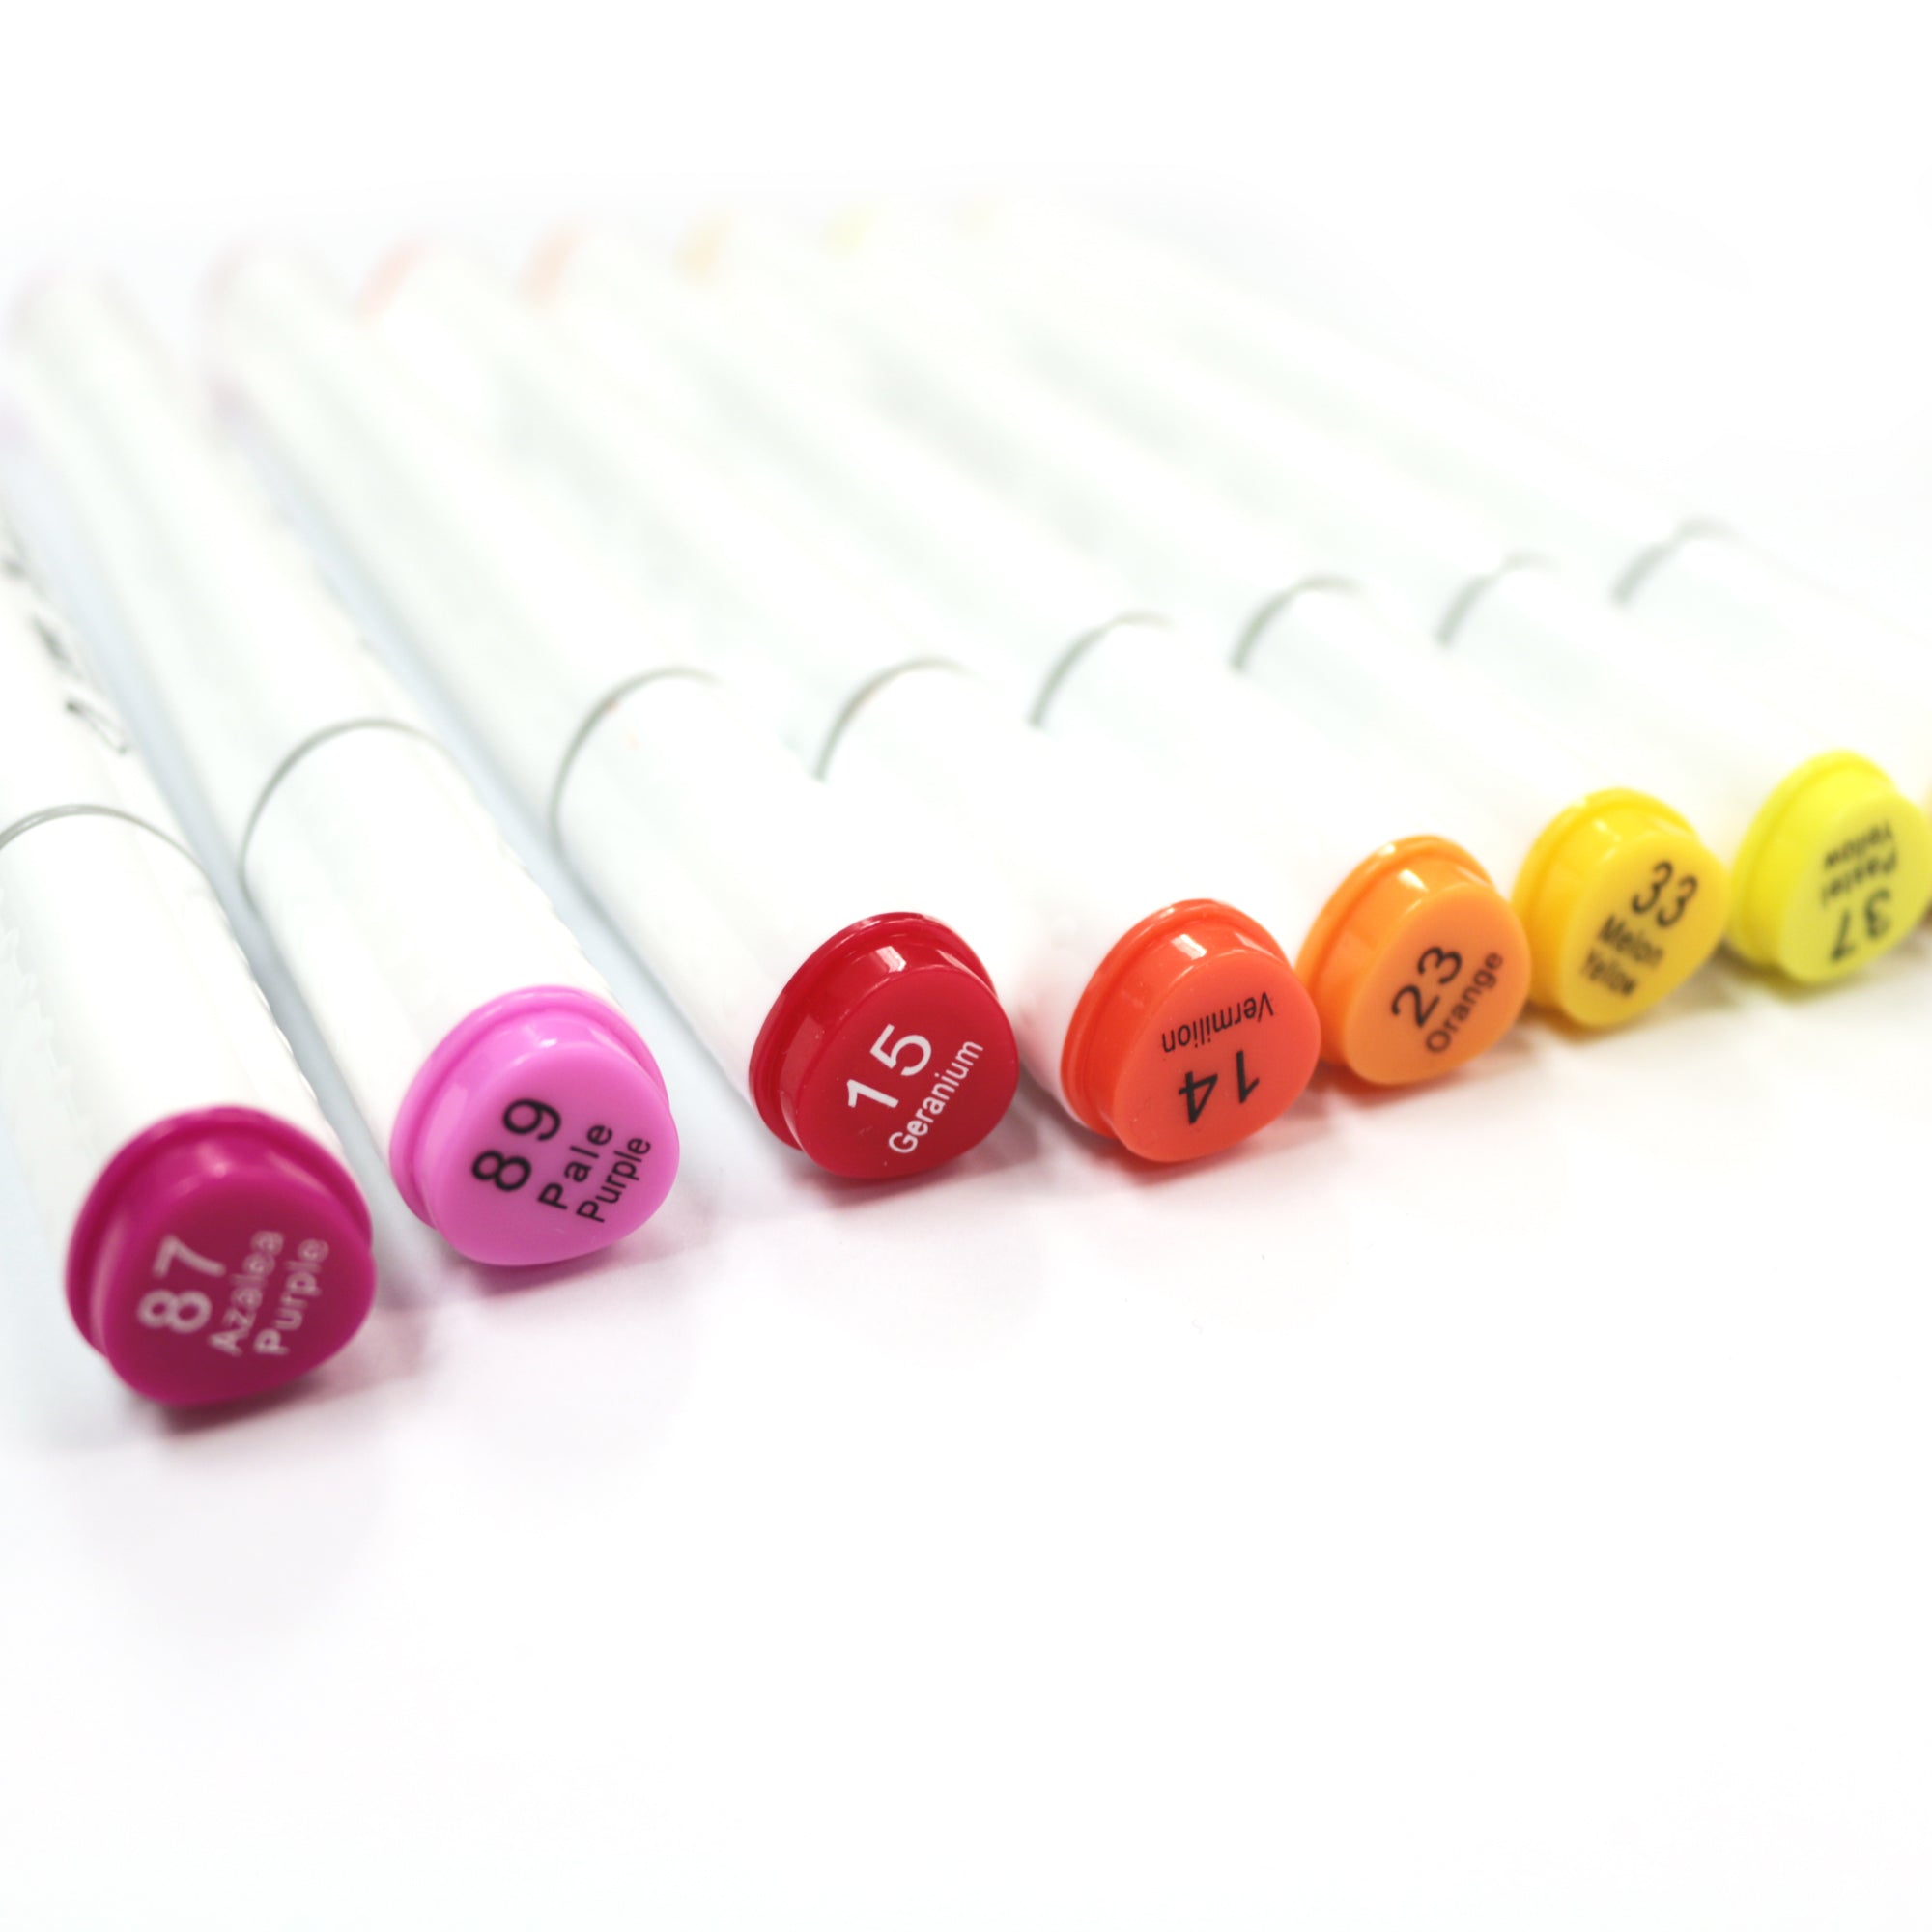 Set of 36 Double-sided Alcohol Markers Pro Touch + Bag